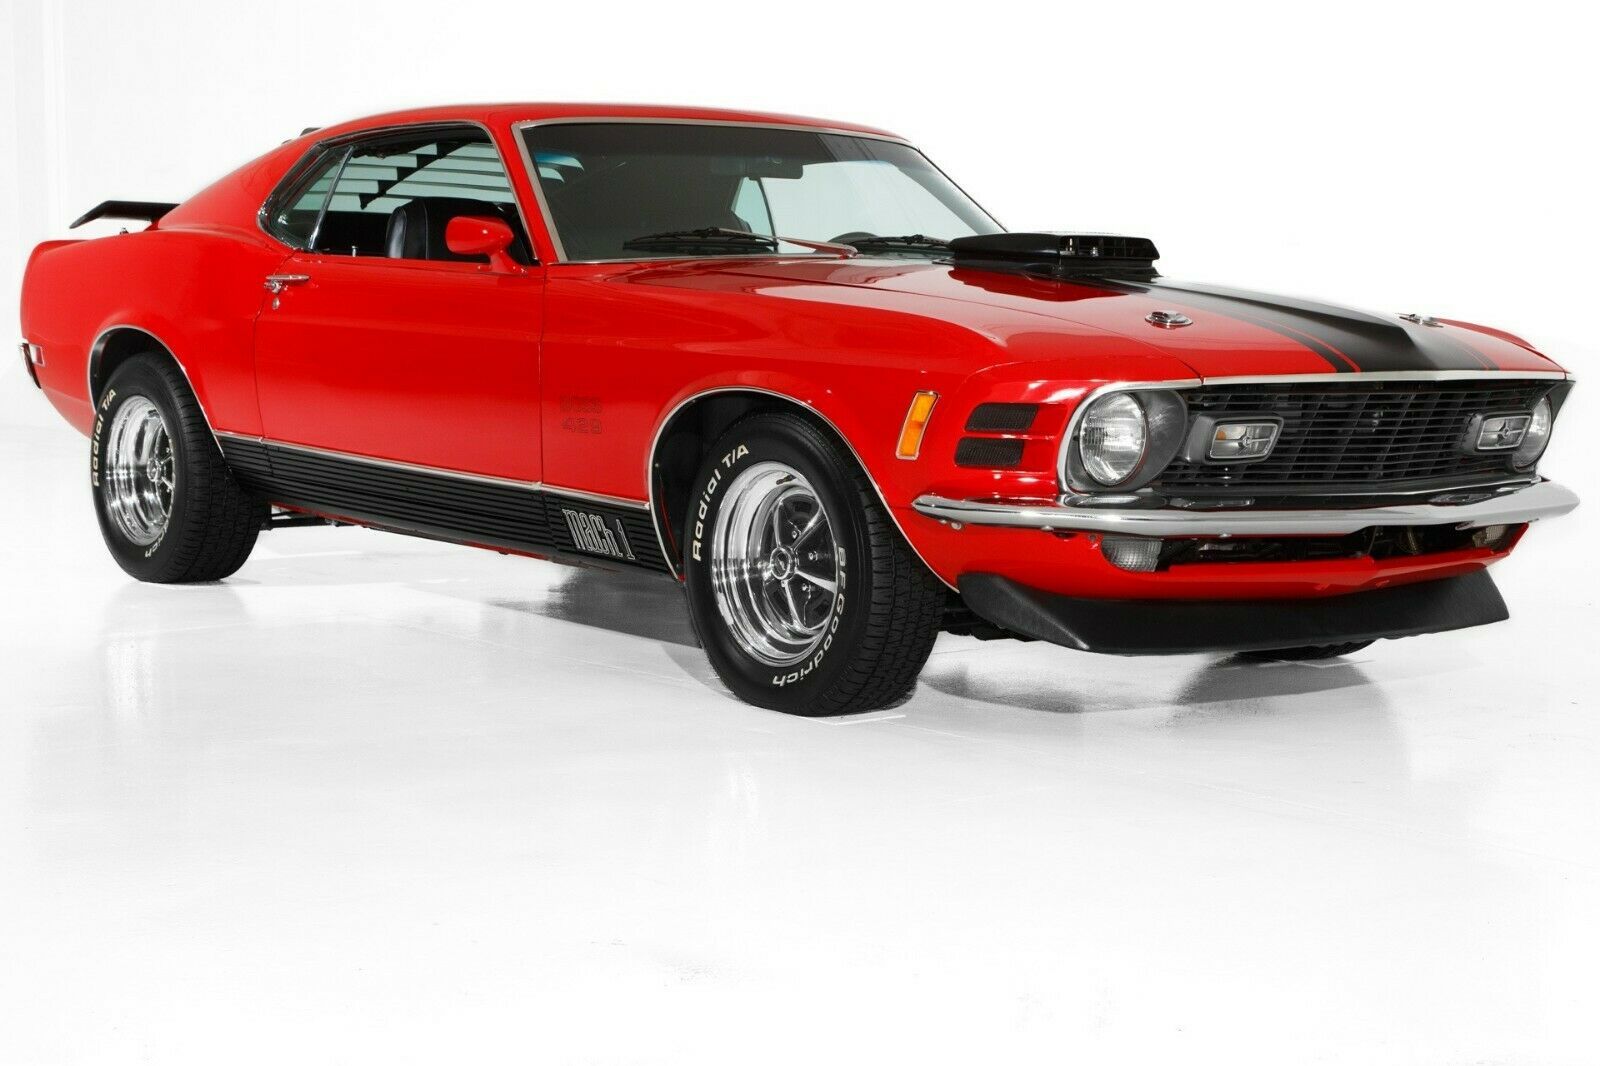 1970 Ford Mustang BOSS 429 red 24x36 inch poster | Ready to ship now - $21.77